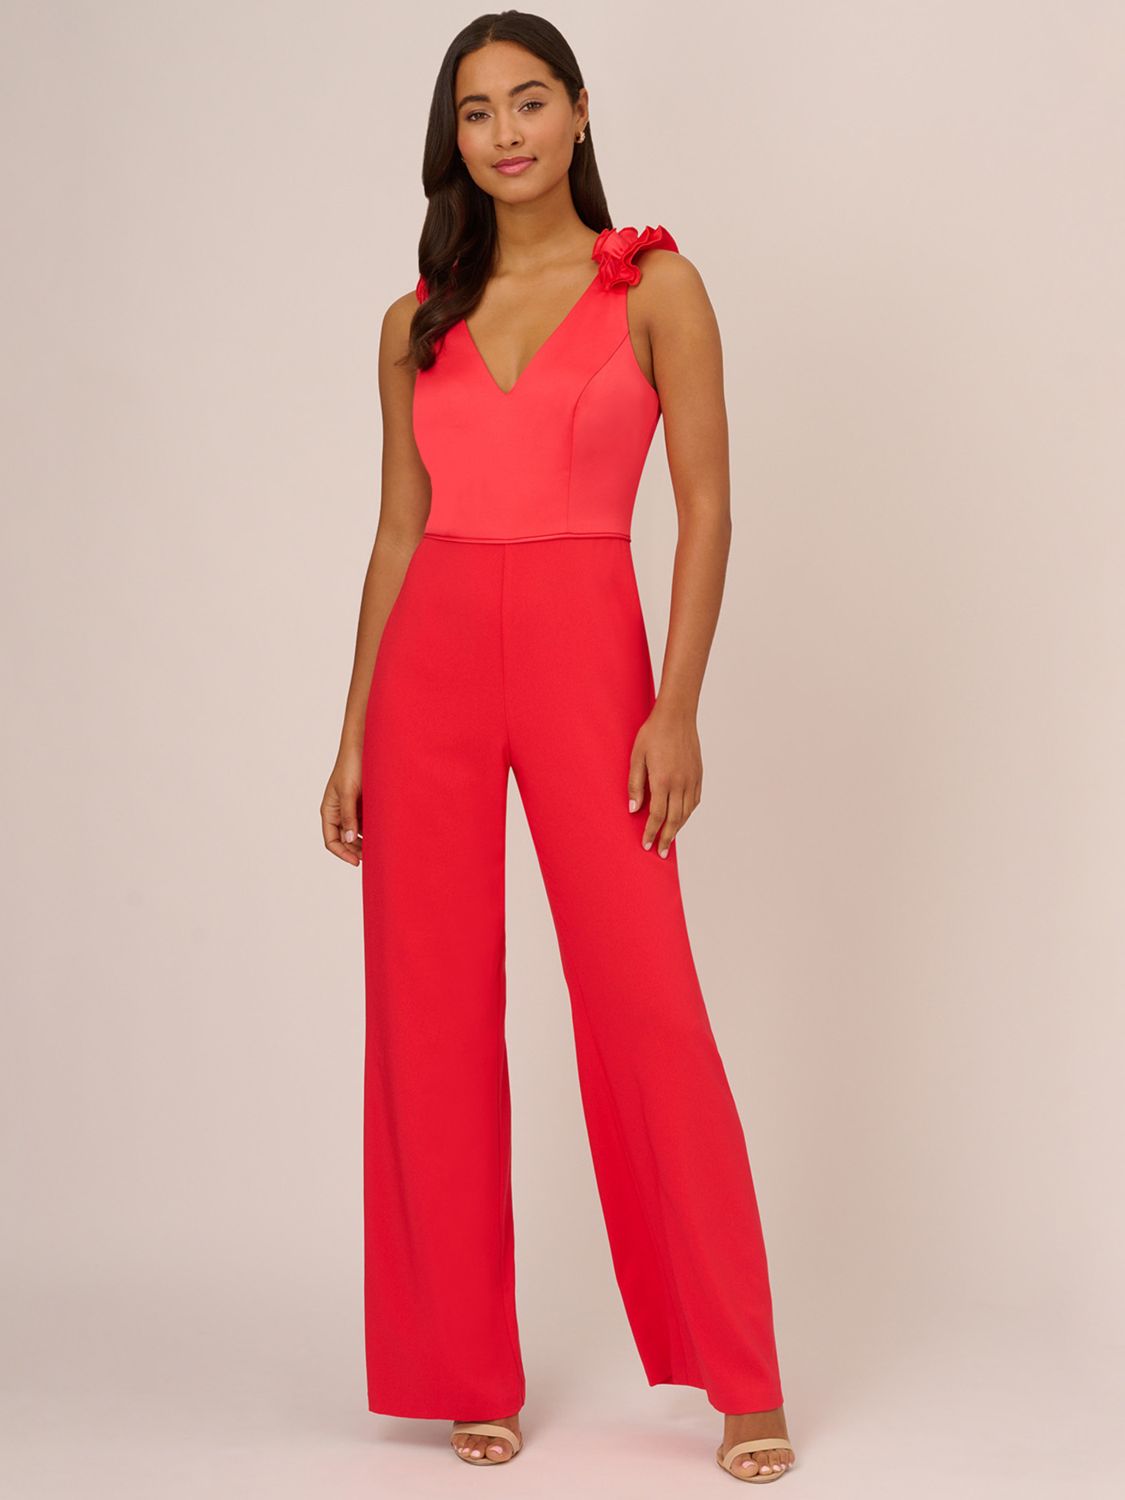 Adrianna Papell Satin Crepe Wide Leg Jumpsuits, Calypso Coral, 14